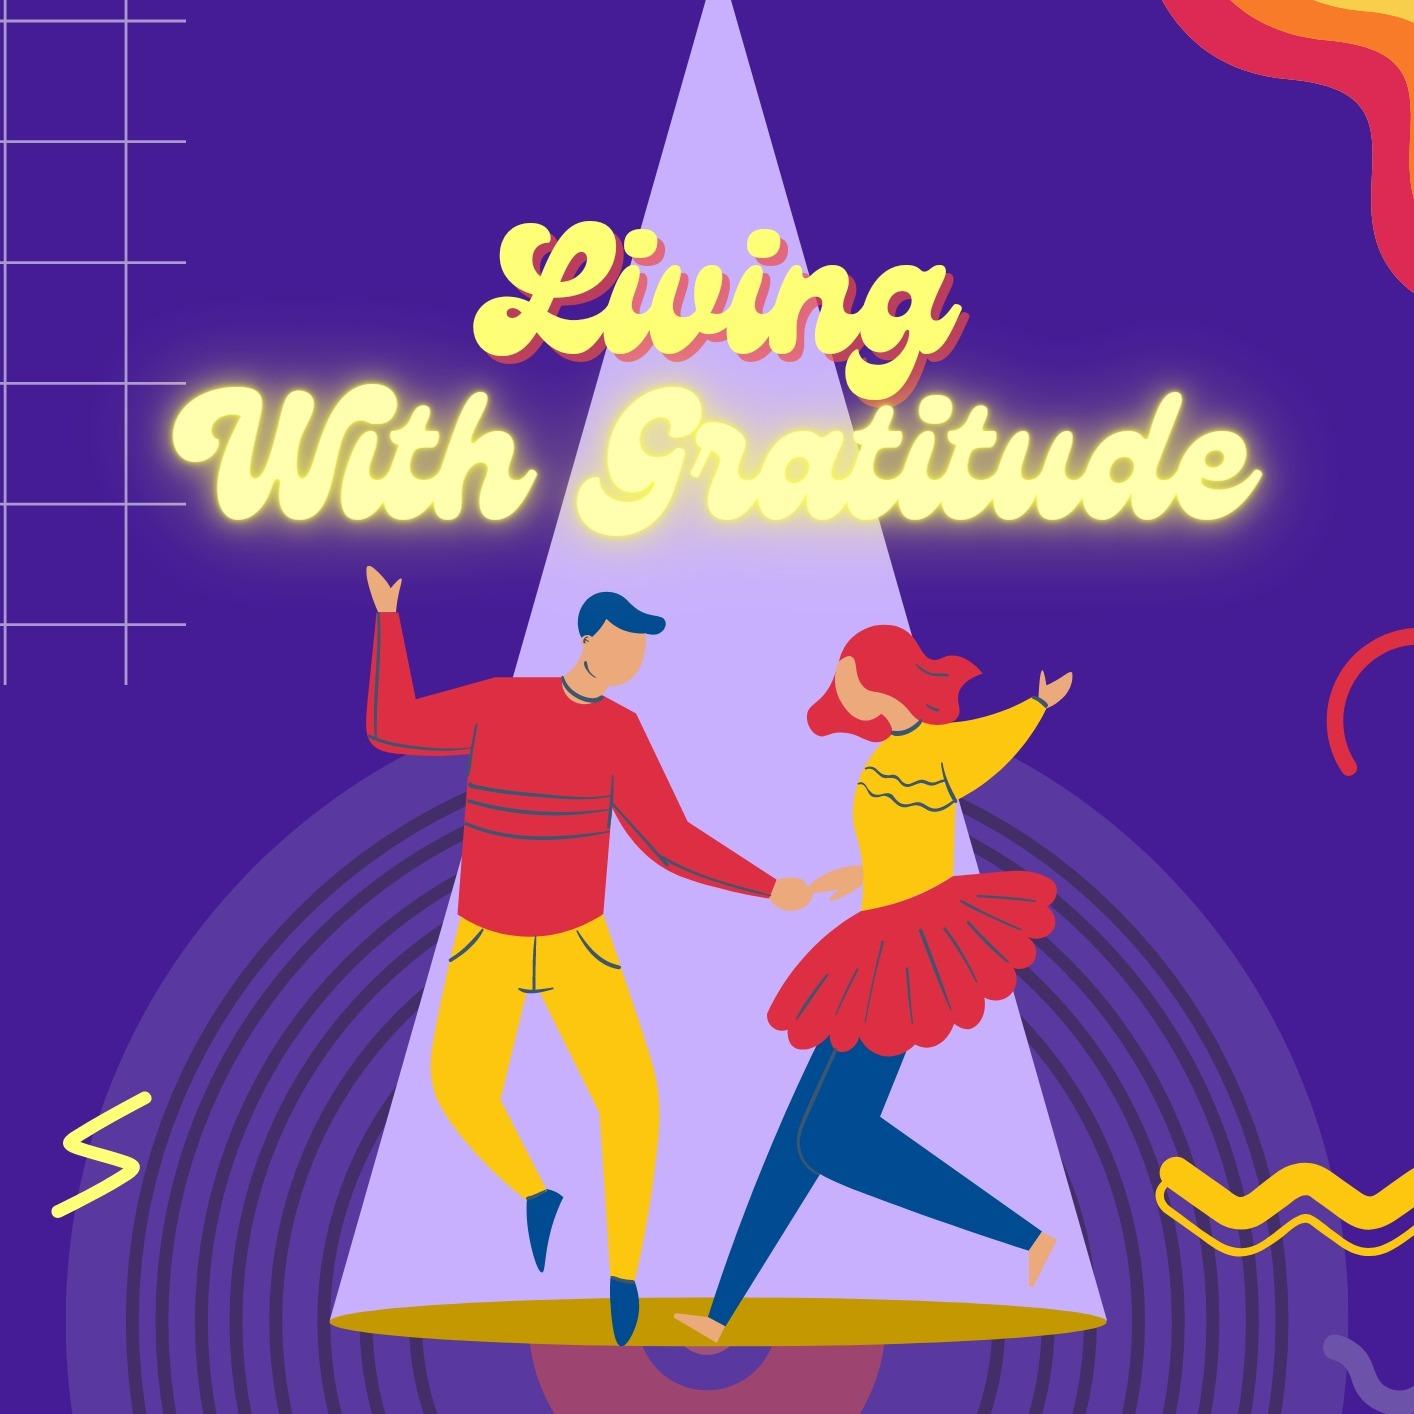 Living with Gratitude